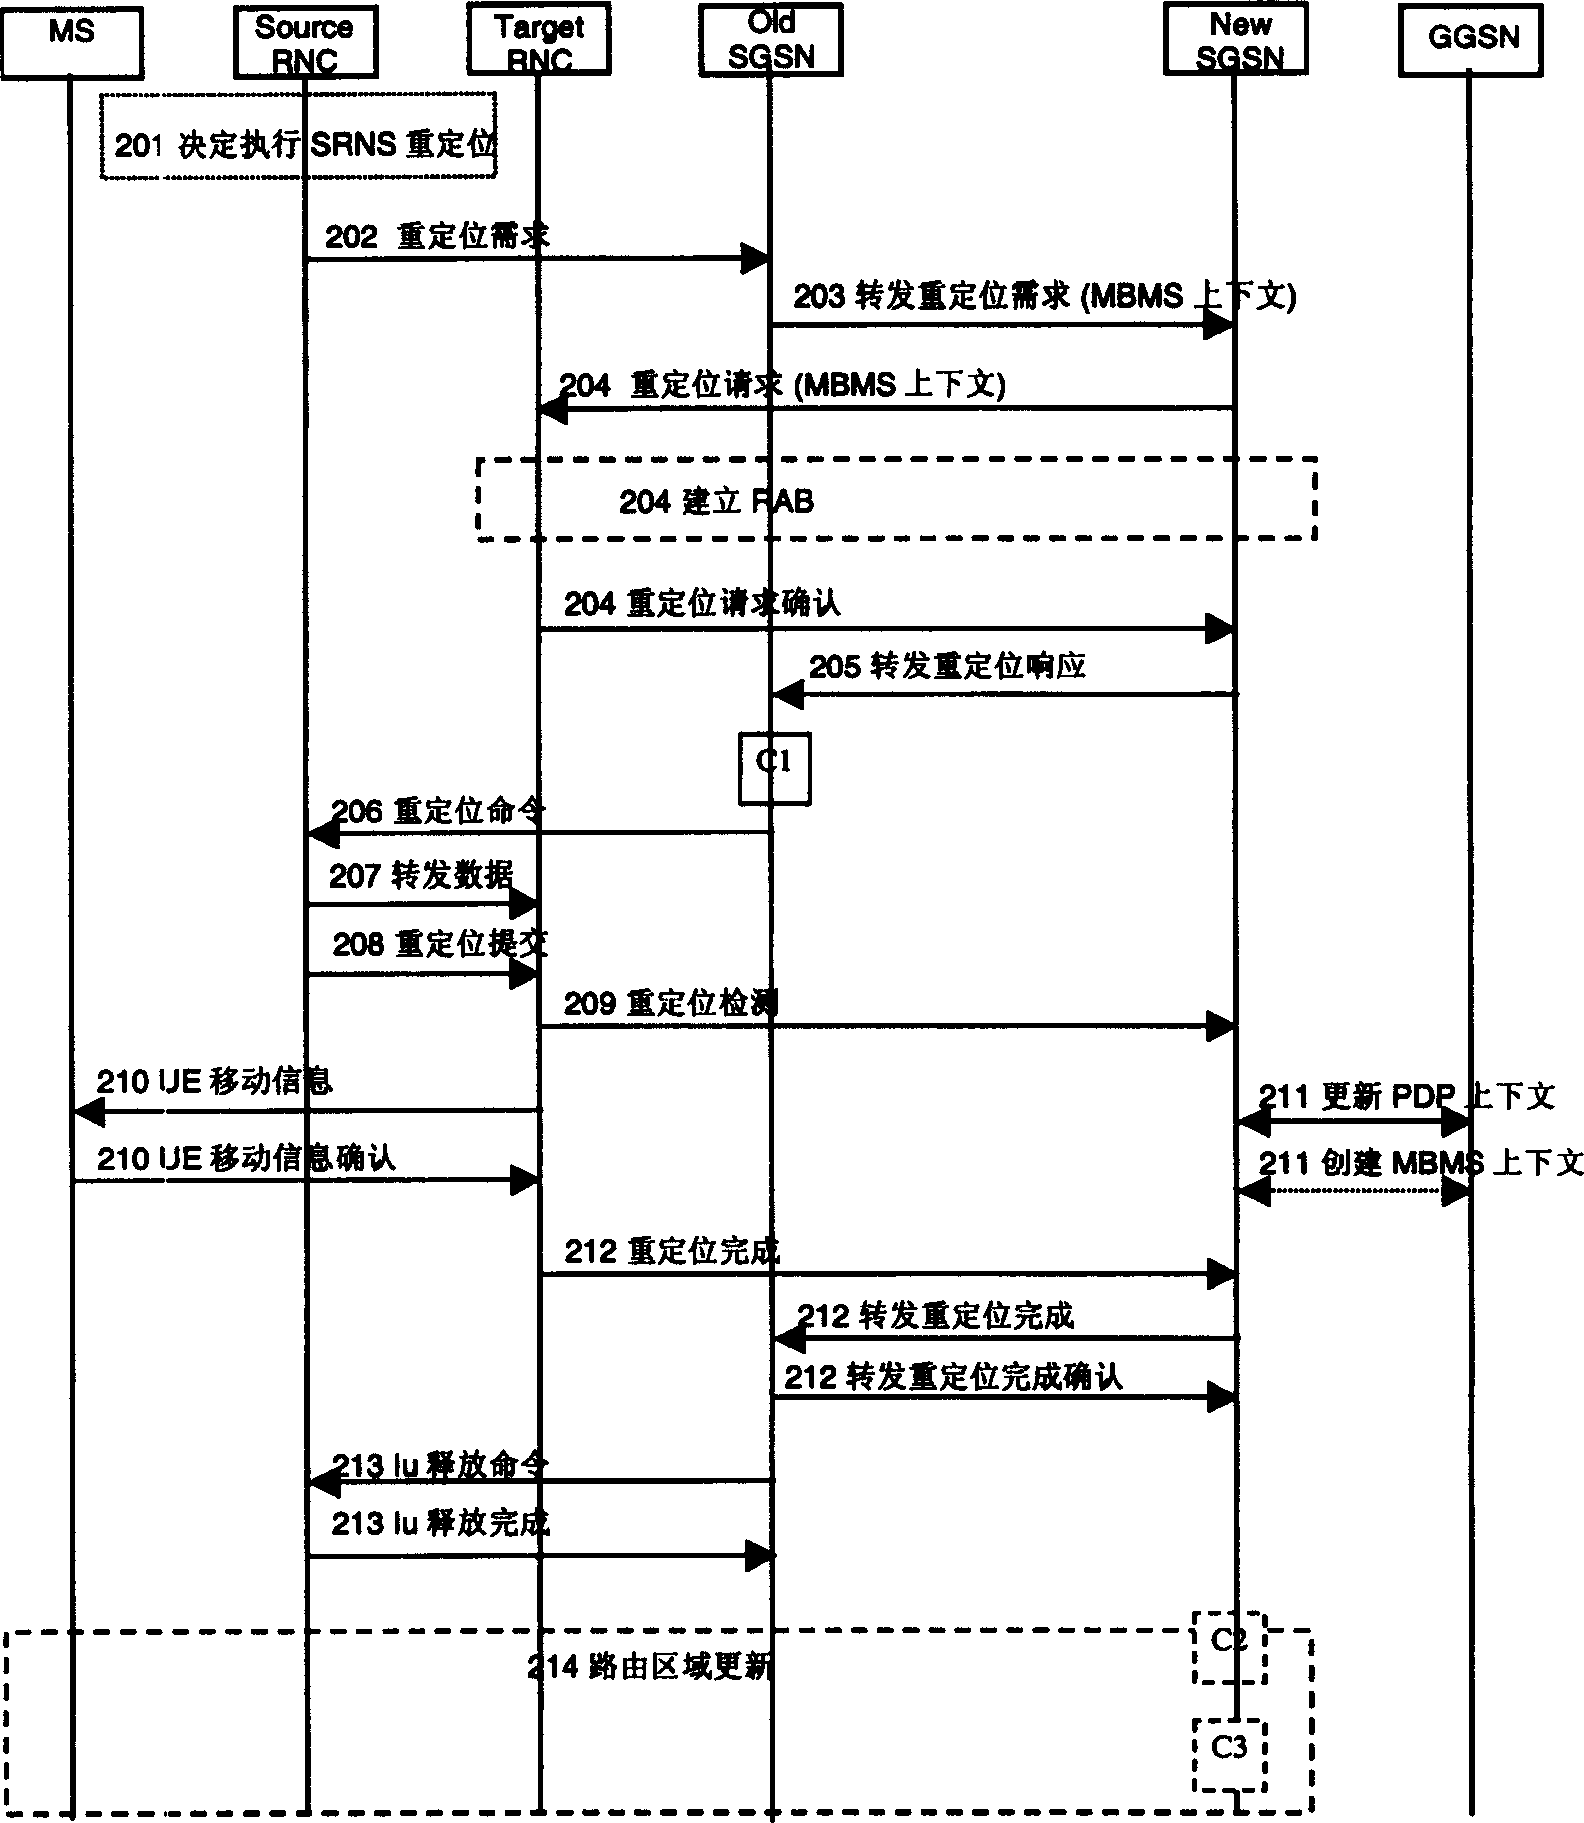 Method for supporting services in multimedia broadcast and multicast by sharing Lu signaling connection